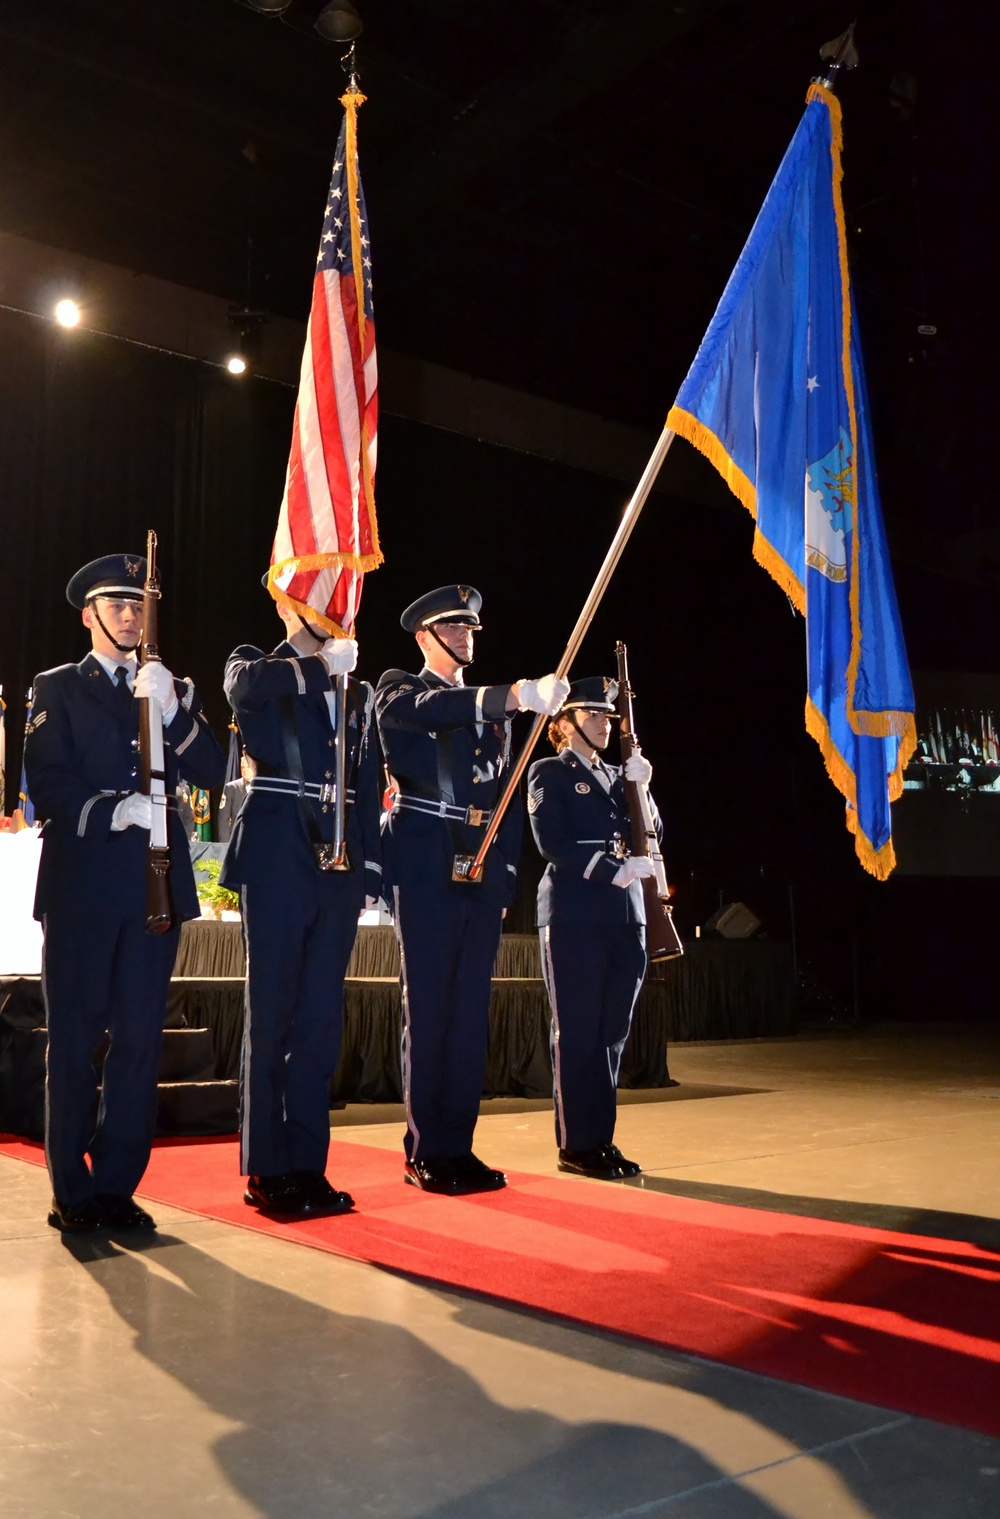 Ceremonial honor guard shines during ANG event